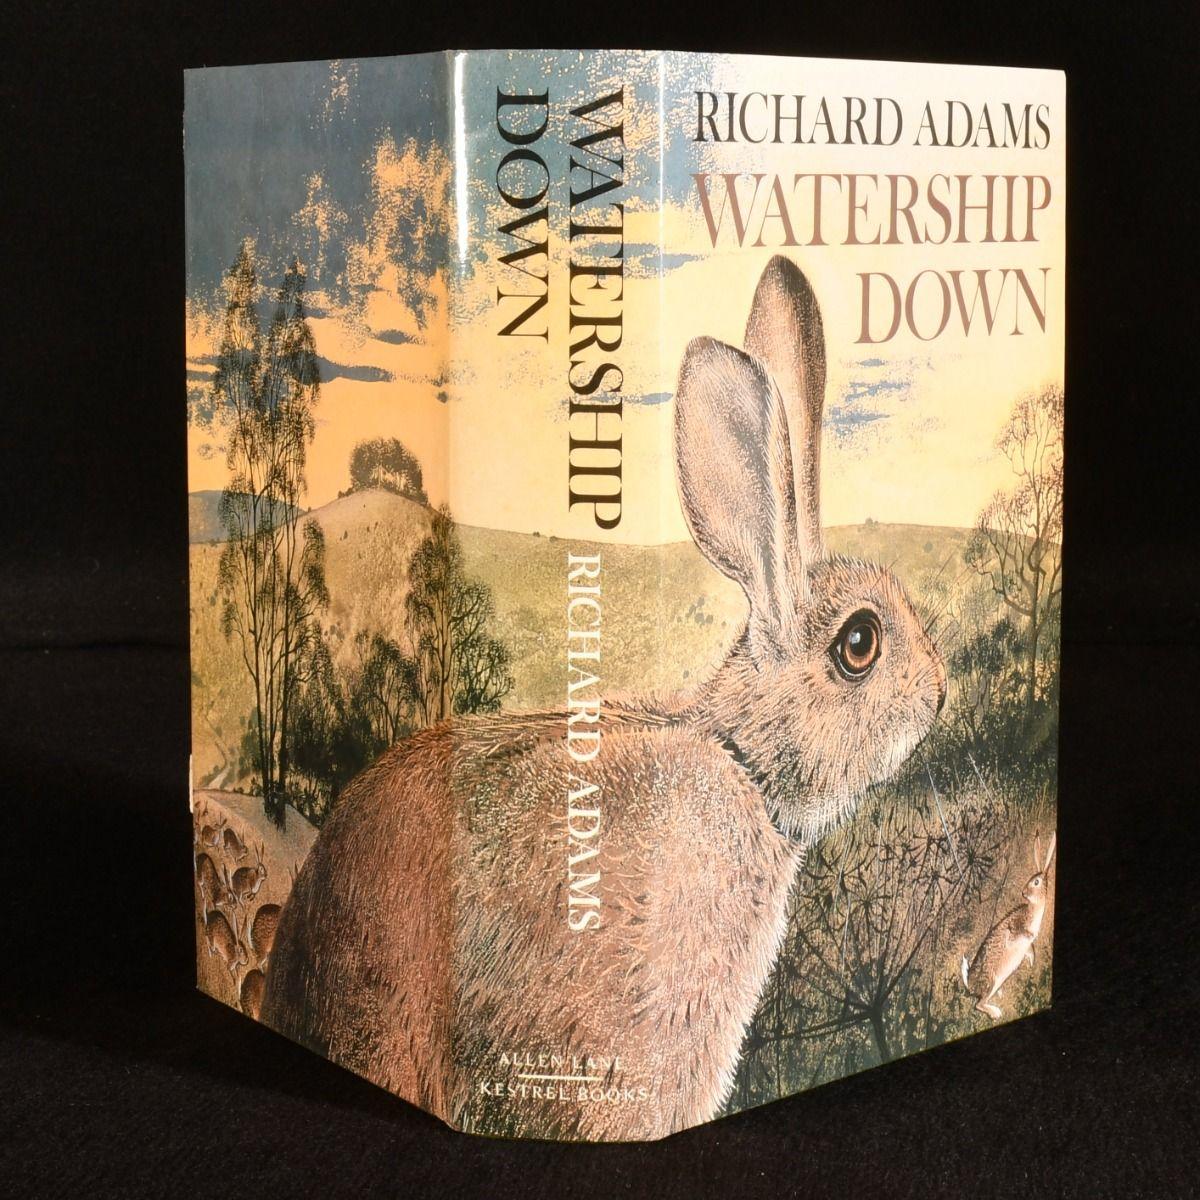 A signed copy of the scarce 10th Anniversary edition of Richard Adams's beloved novel.

The very scarce 1982 edition of Adams's novel, published to celebrate it being a decade since the work was first published.

Flat signed by the author to the